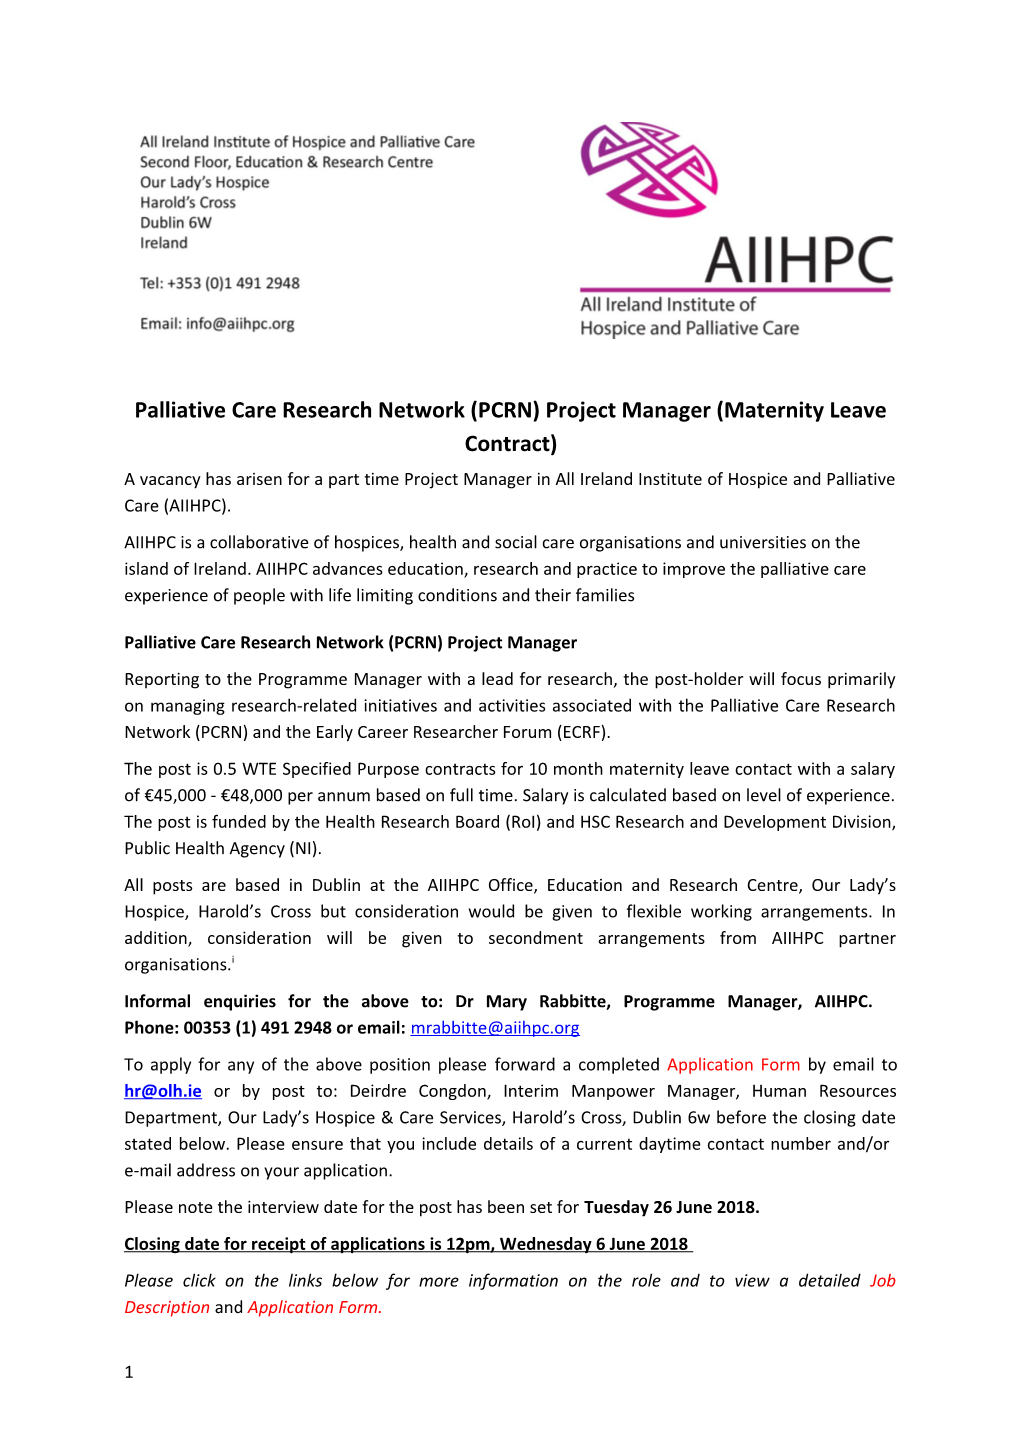 Palliative Care Research Network (PCRN) Project Manager (Maternity Leave Contract)